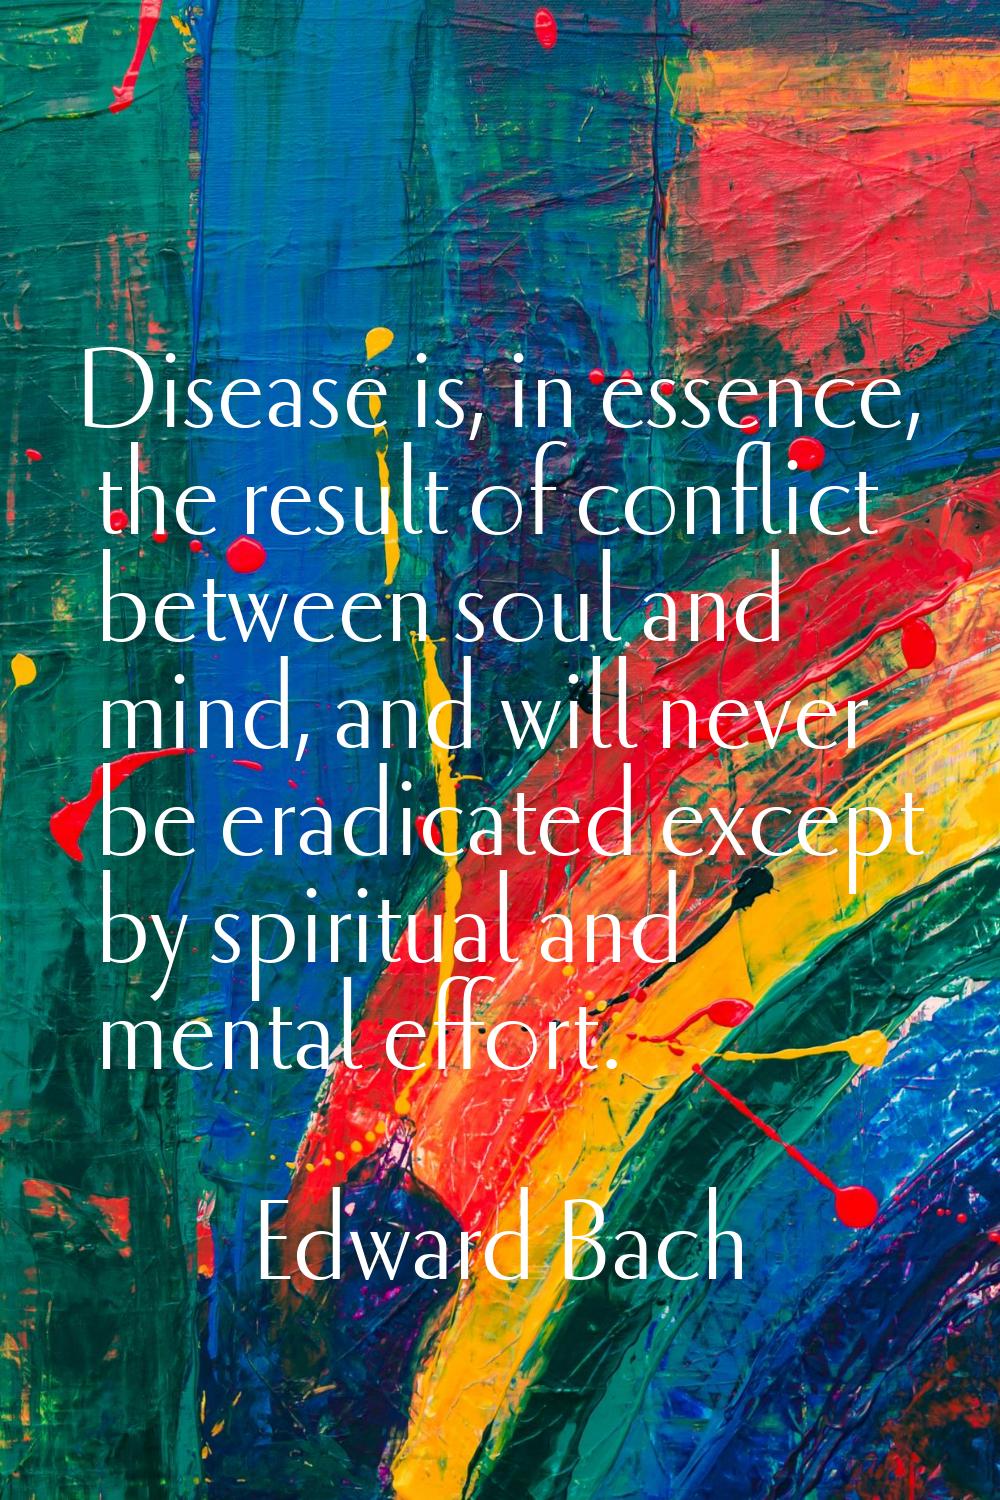 Disease is, in essence, the result of conflict between soul and mind, and will never be eradicated 